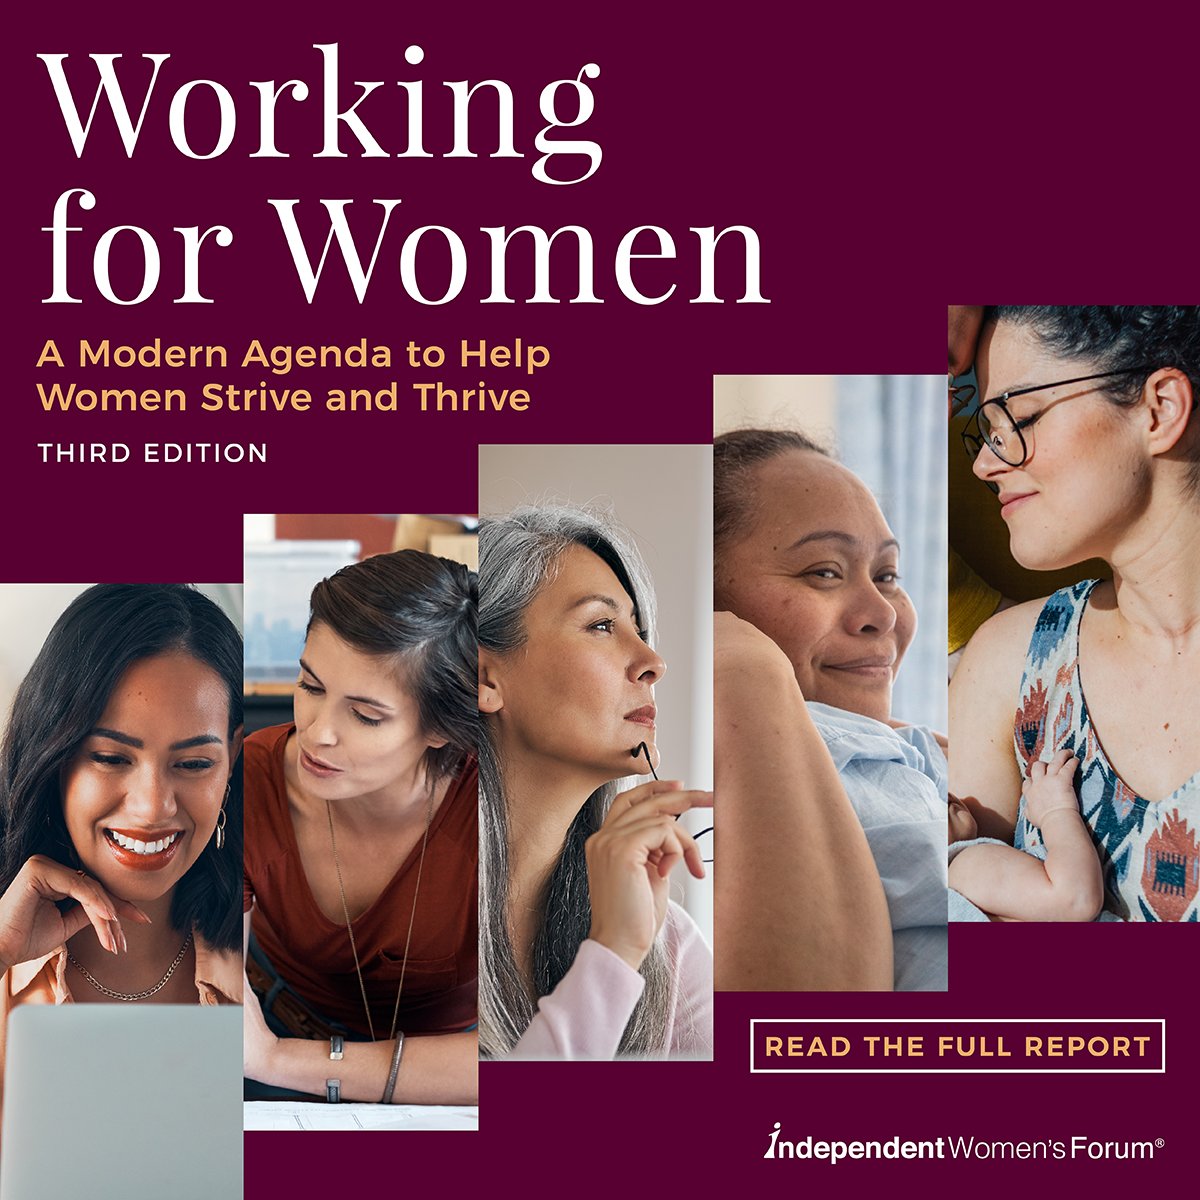 📺 WATCH: @PatricePinkFile, @IWF Director of the Center for Economic Opportunity, & @carriesheffield, IWF Senior Policy Analyst, walk you through the various aspects of the new #WorkingForWomen Report from career & workplace to finances & parental policy.
iwnetwork.com/working-for-wo…